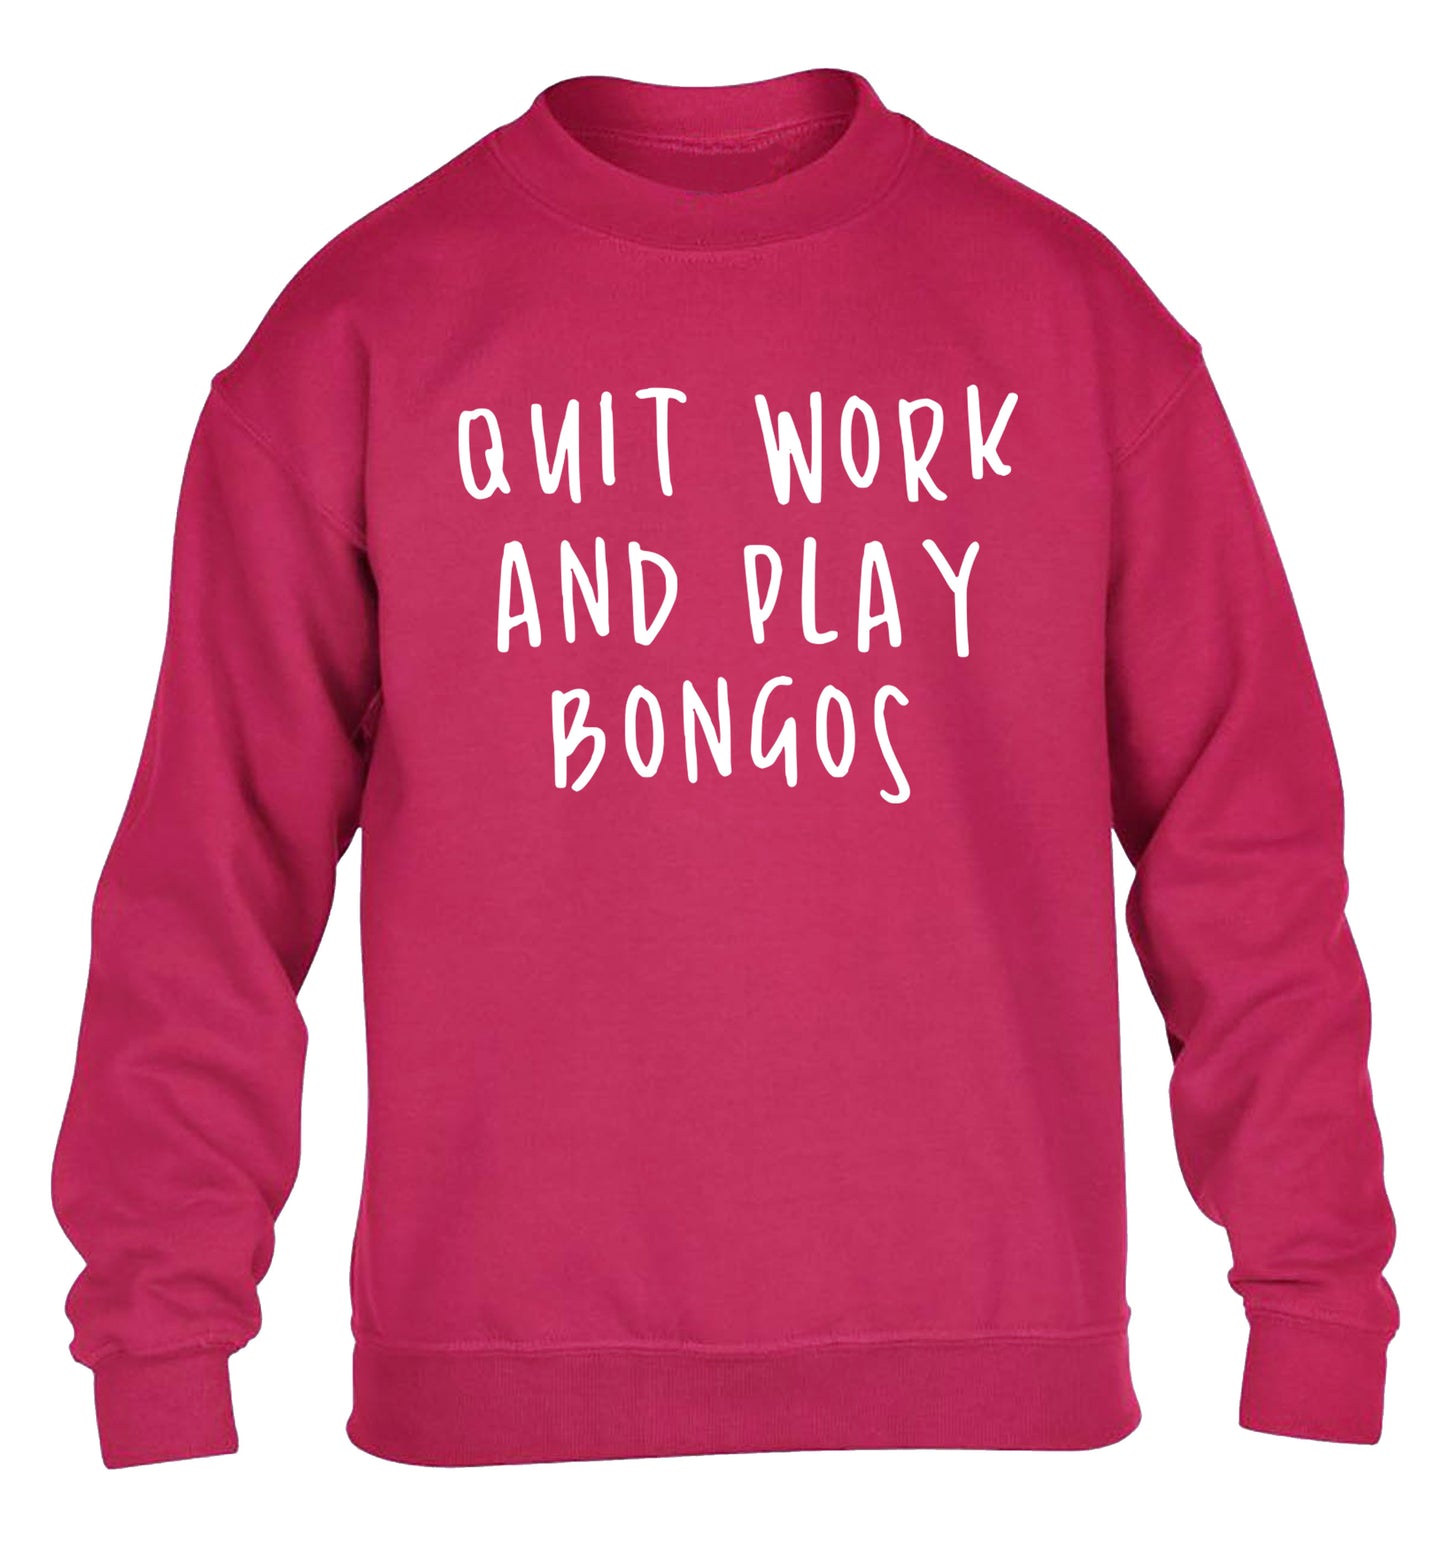 Quit work and play bongos children's pink sweater 12-14 Years